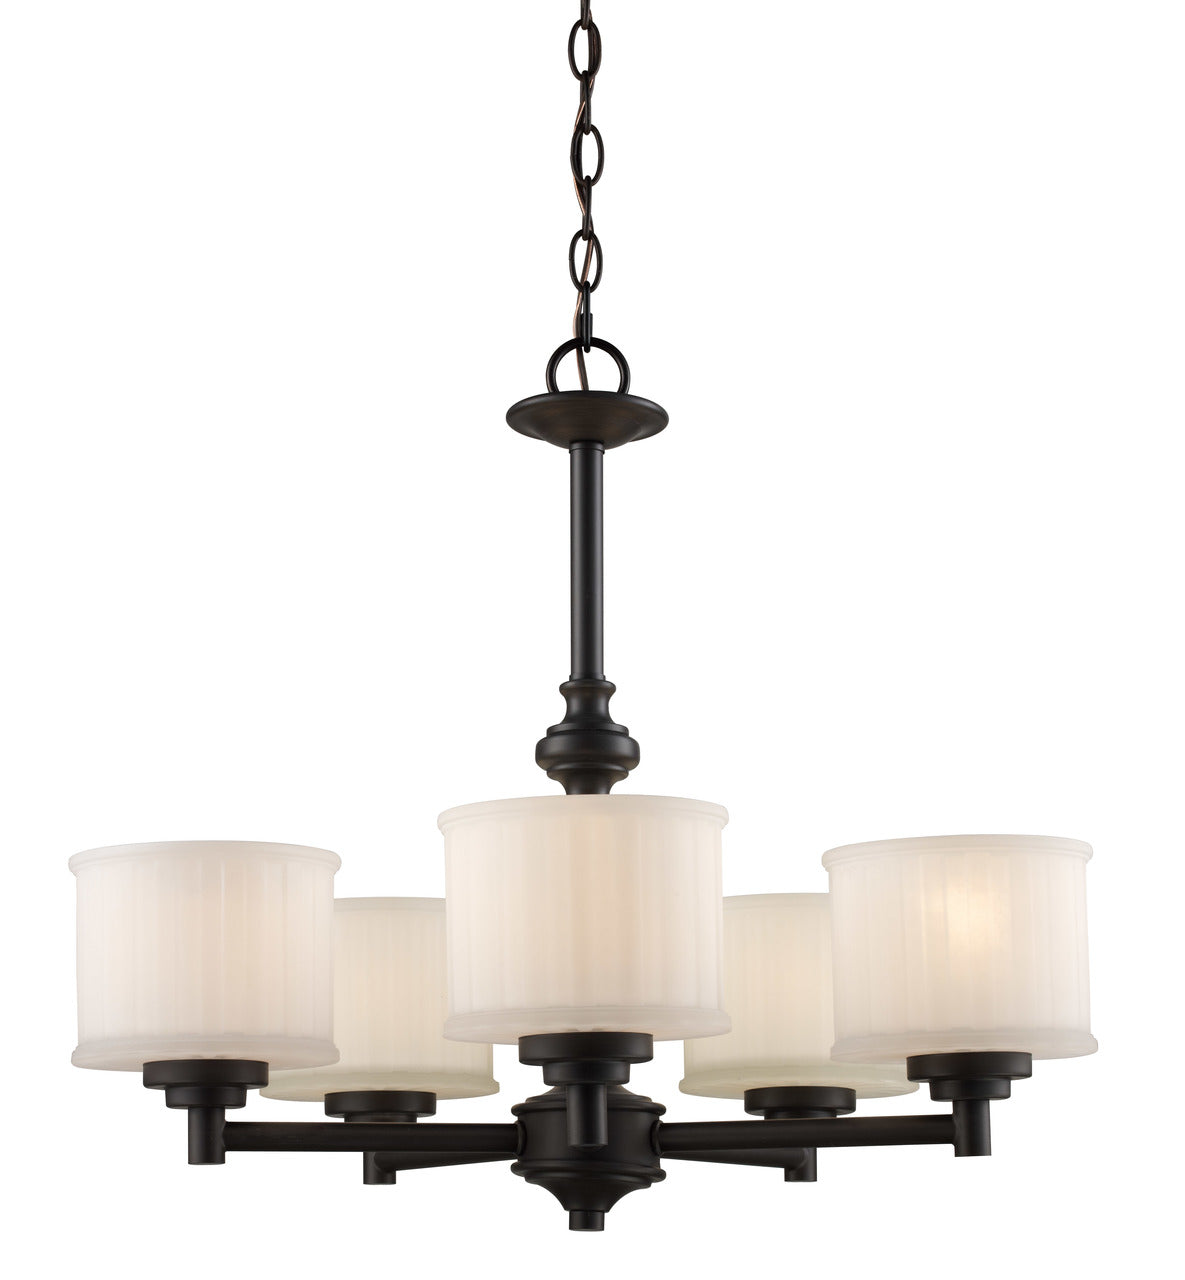 Trans Globe Lighting 70728 ROB 24" Indoor Rubbed Oil Bronze Transitional Chandelier